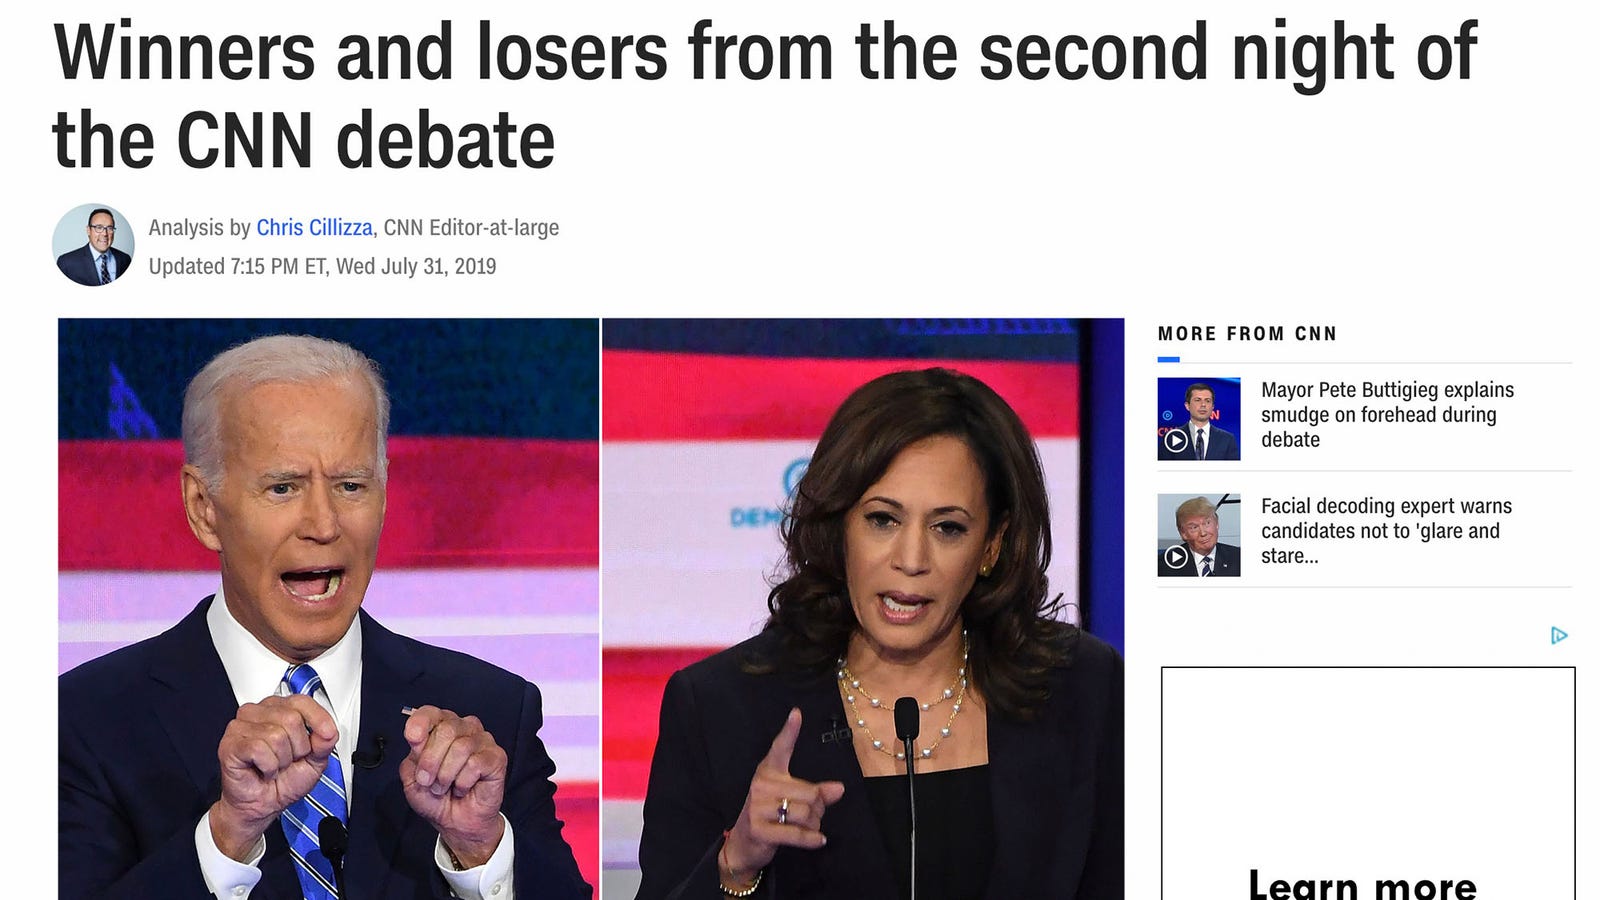 CNN Publishes Winners And Losers Of Wednesday Night Debate 45 Minutes